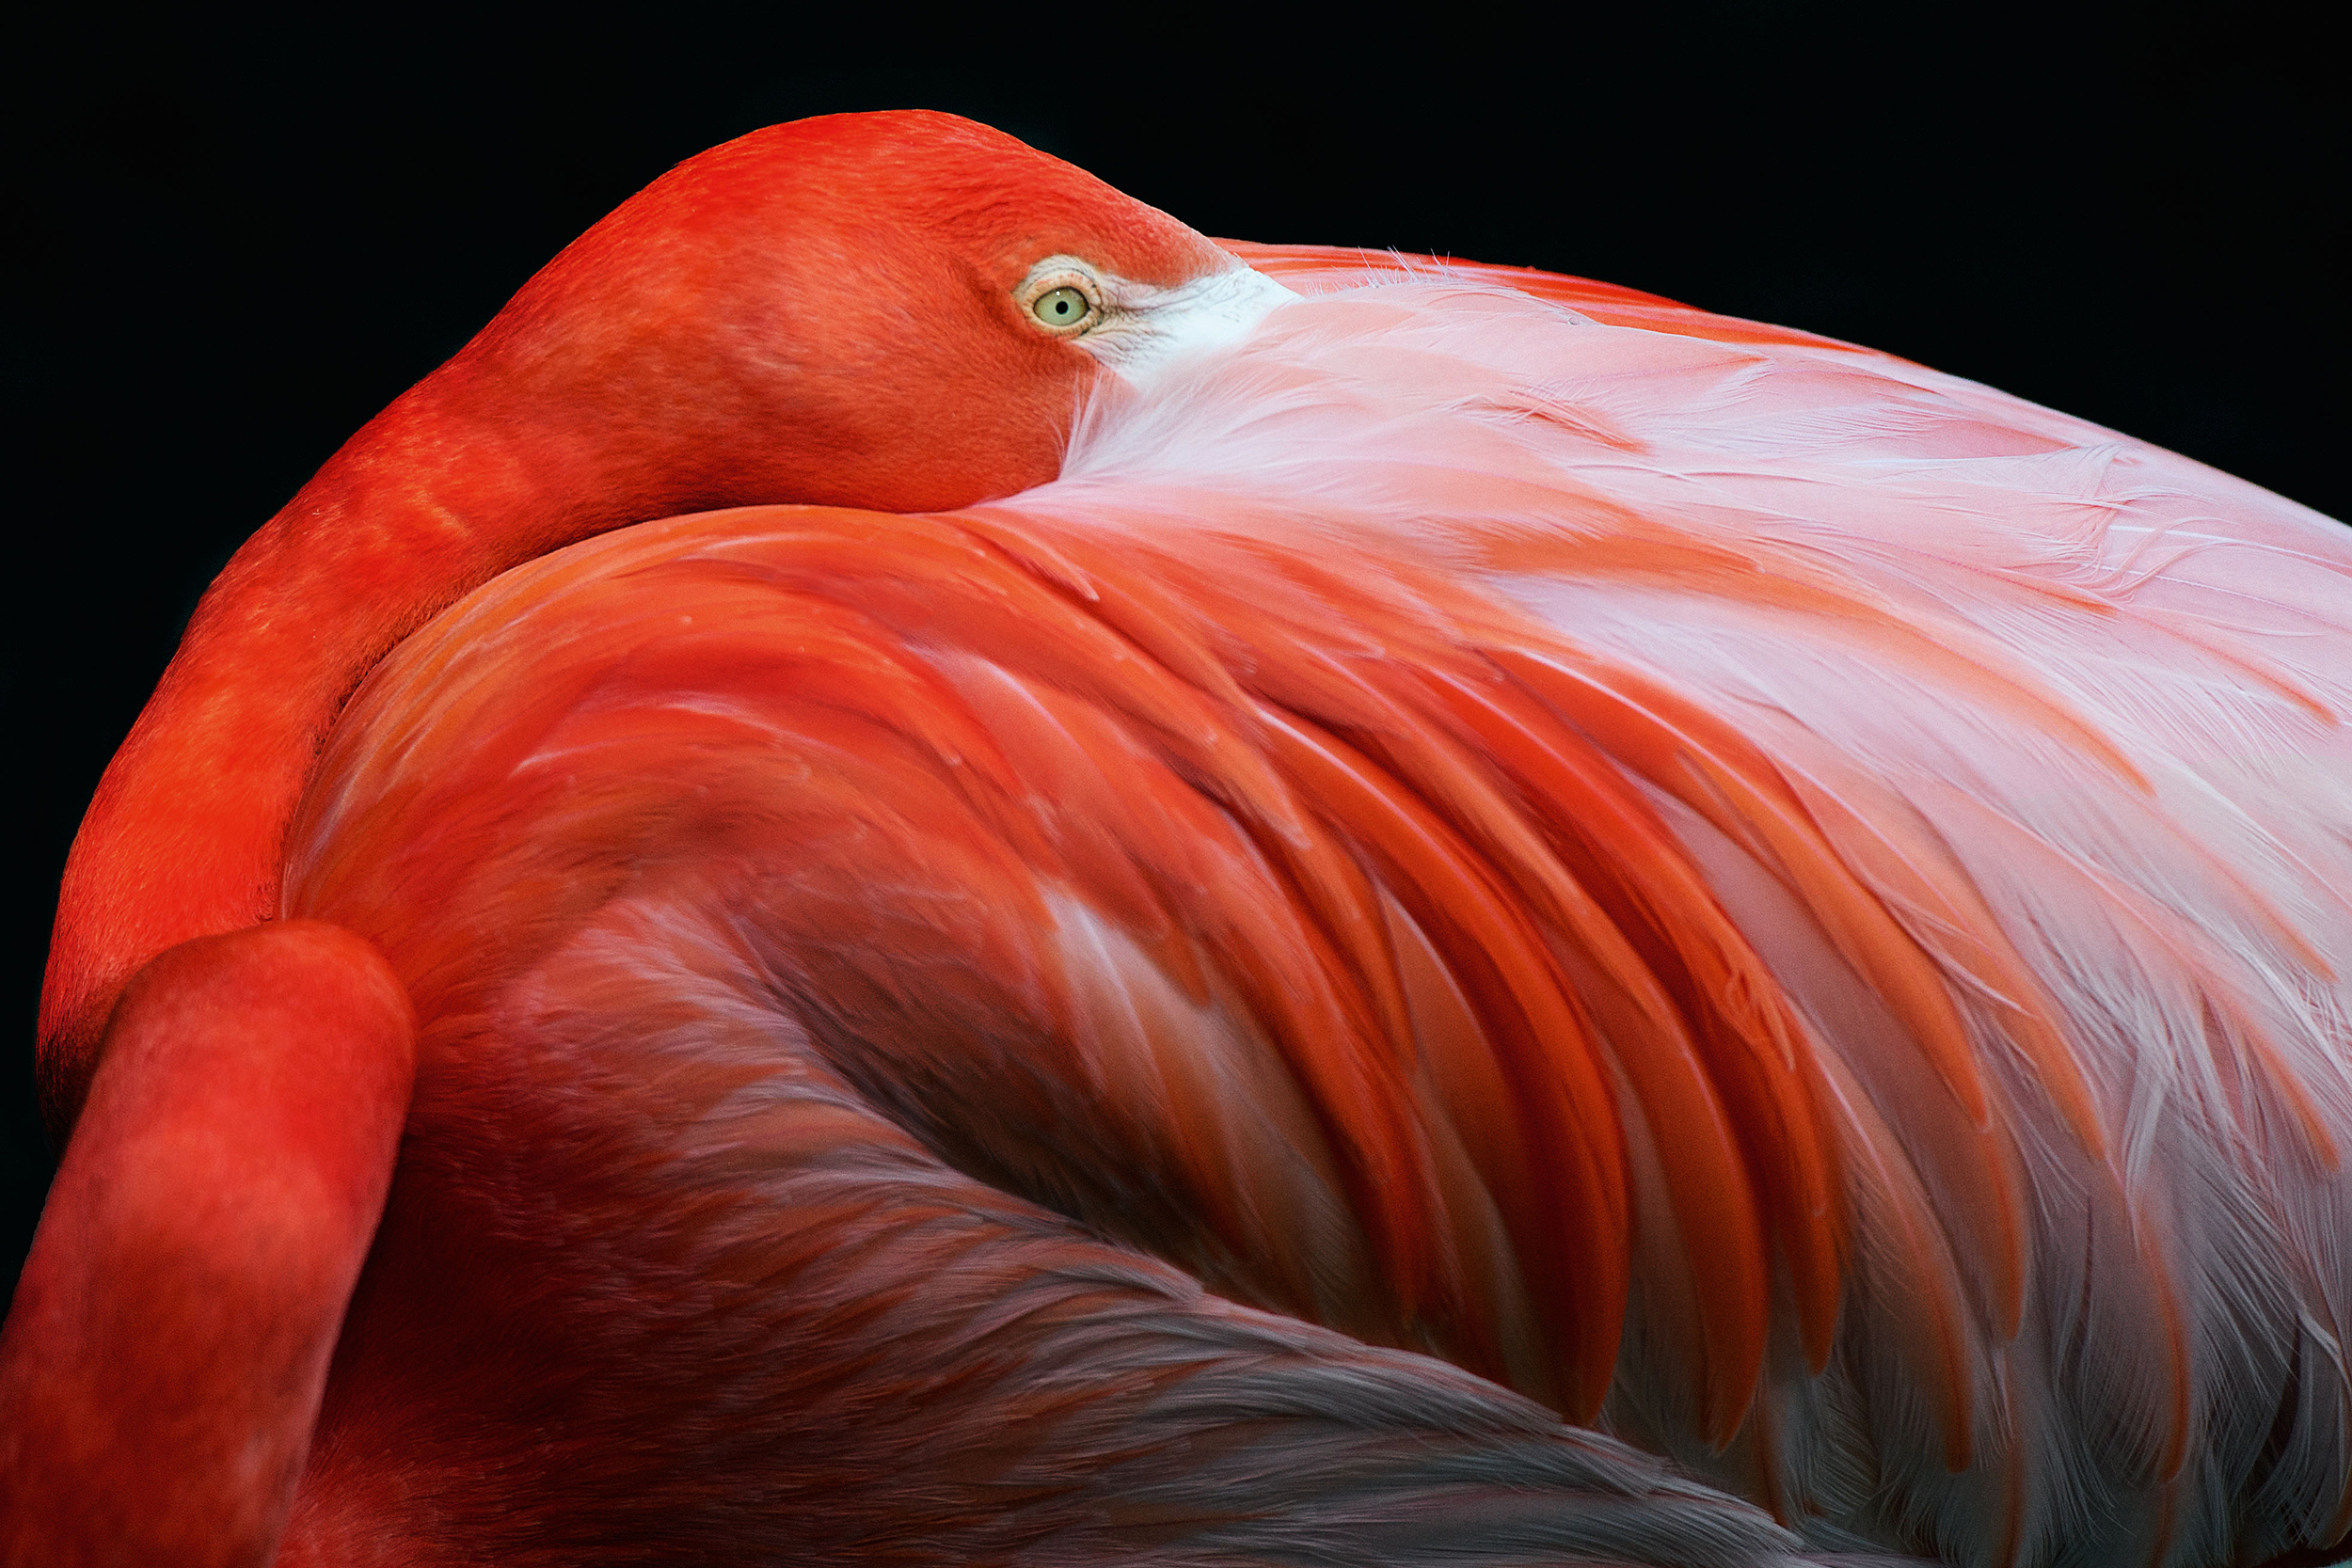 The Flamingo, also known as Phoenicopterus roseus from Africa, Southern Europe, and Parts of Asia.  The Greater Flamingo’s signature pink coloring is the result of its diet: Flamingos consume massive amounts of animal and plant plankton very rich in beta carotene. A rich pink coat indicates the bird has a healthy diet, making it more attractive to potential mates.